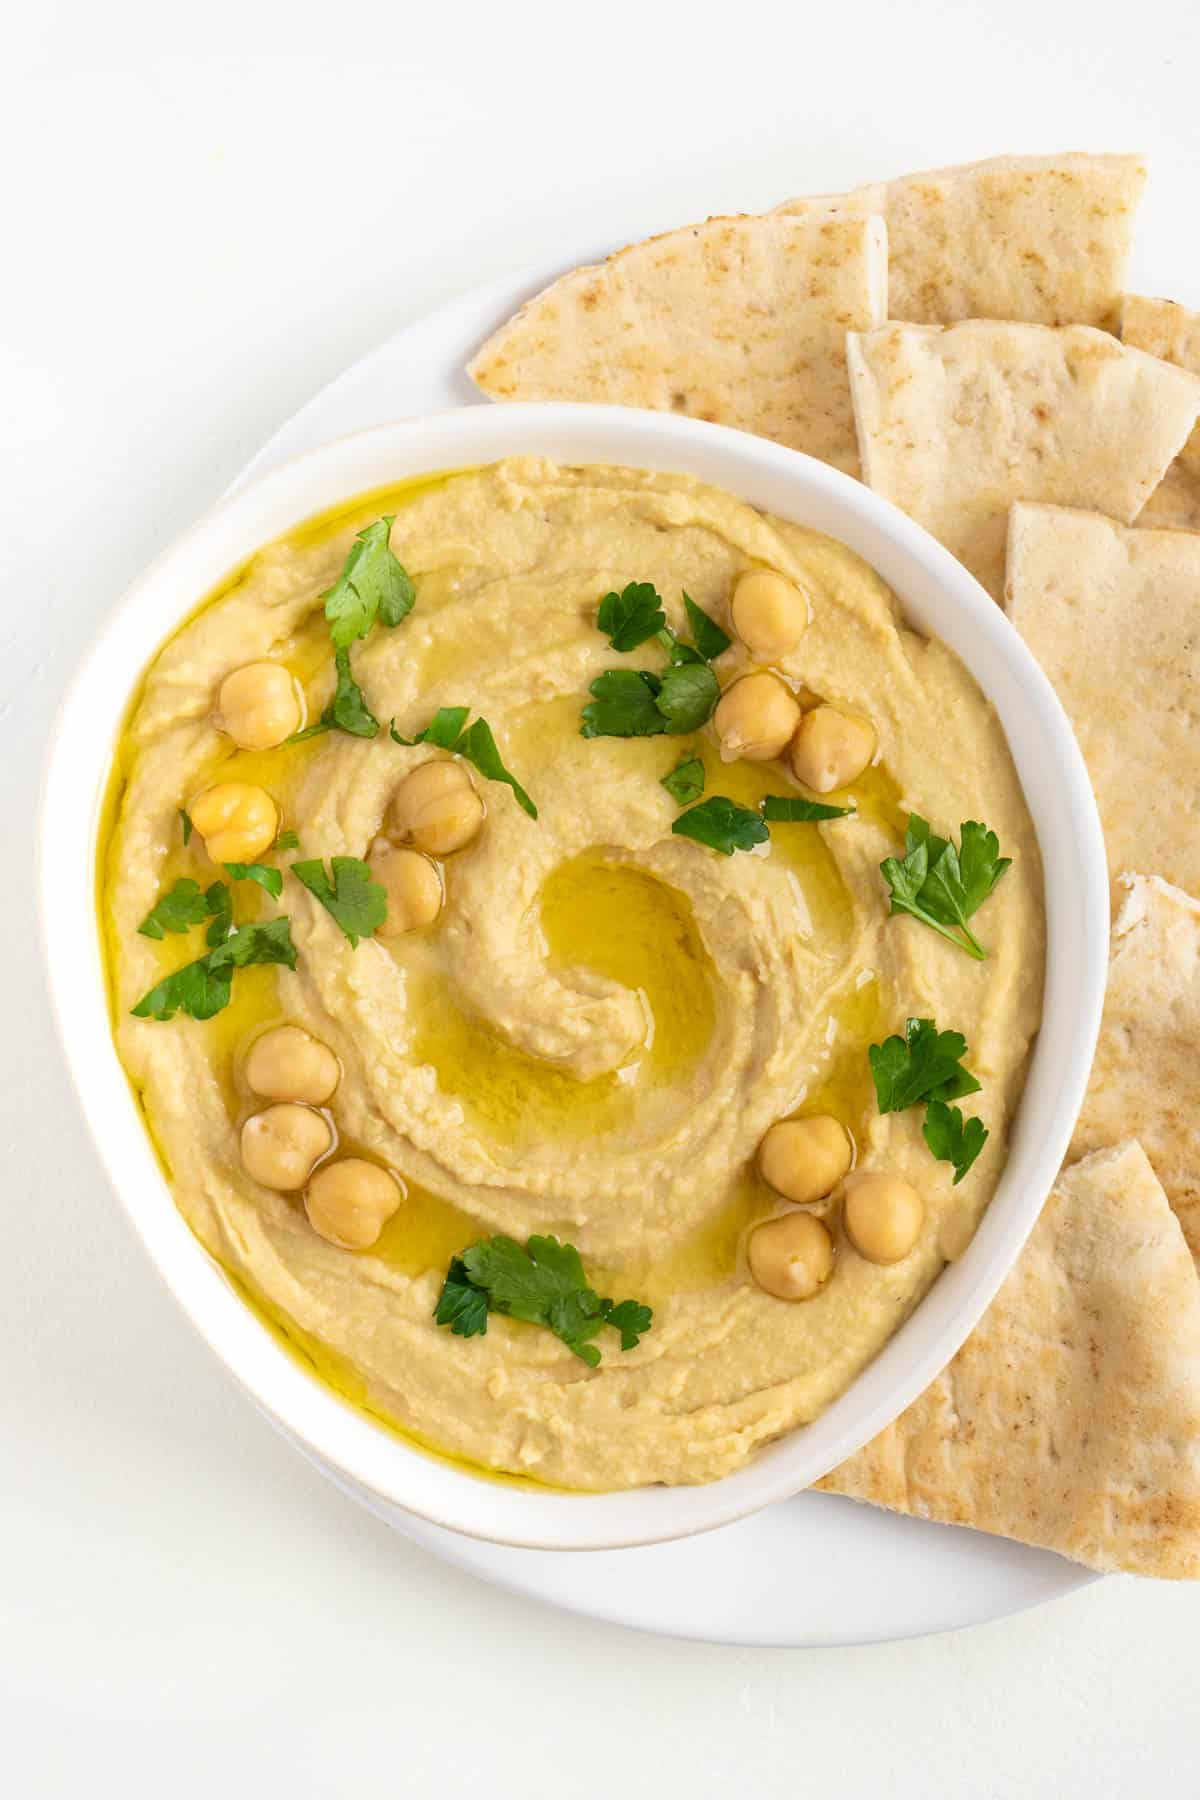 vegan roasted garlic hummus with parsley, chickpeas, and olive oil on top beside pita bread